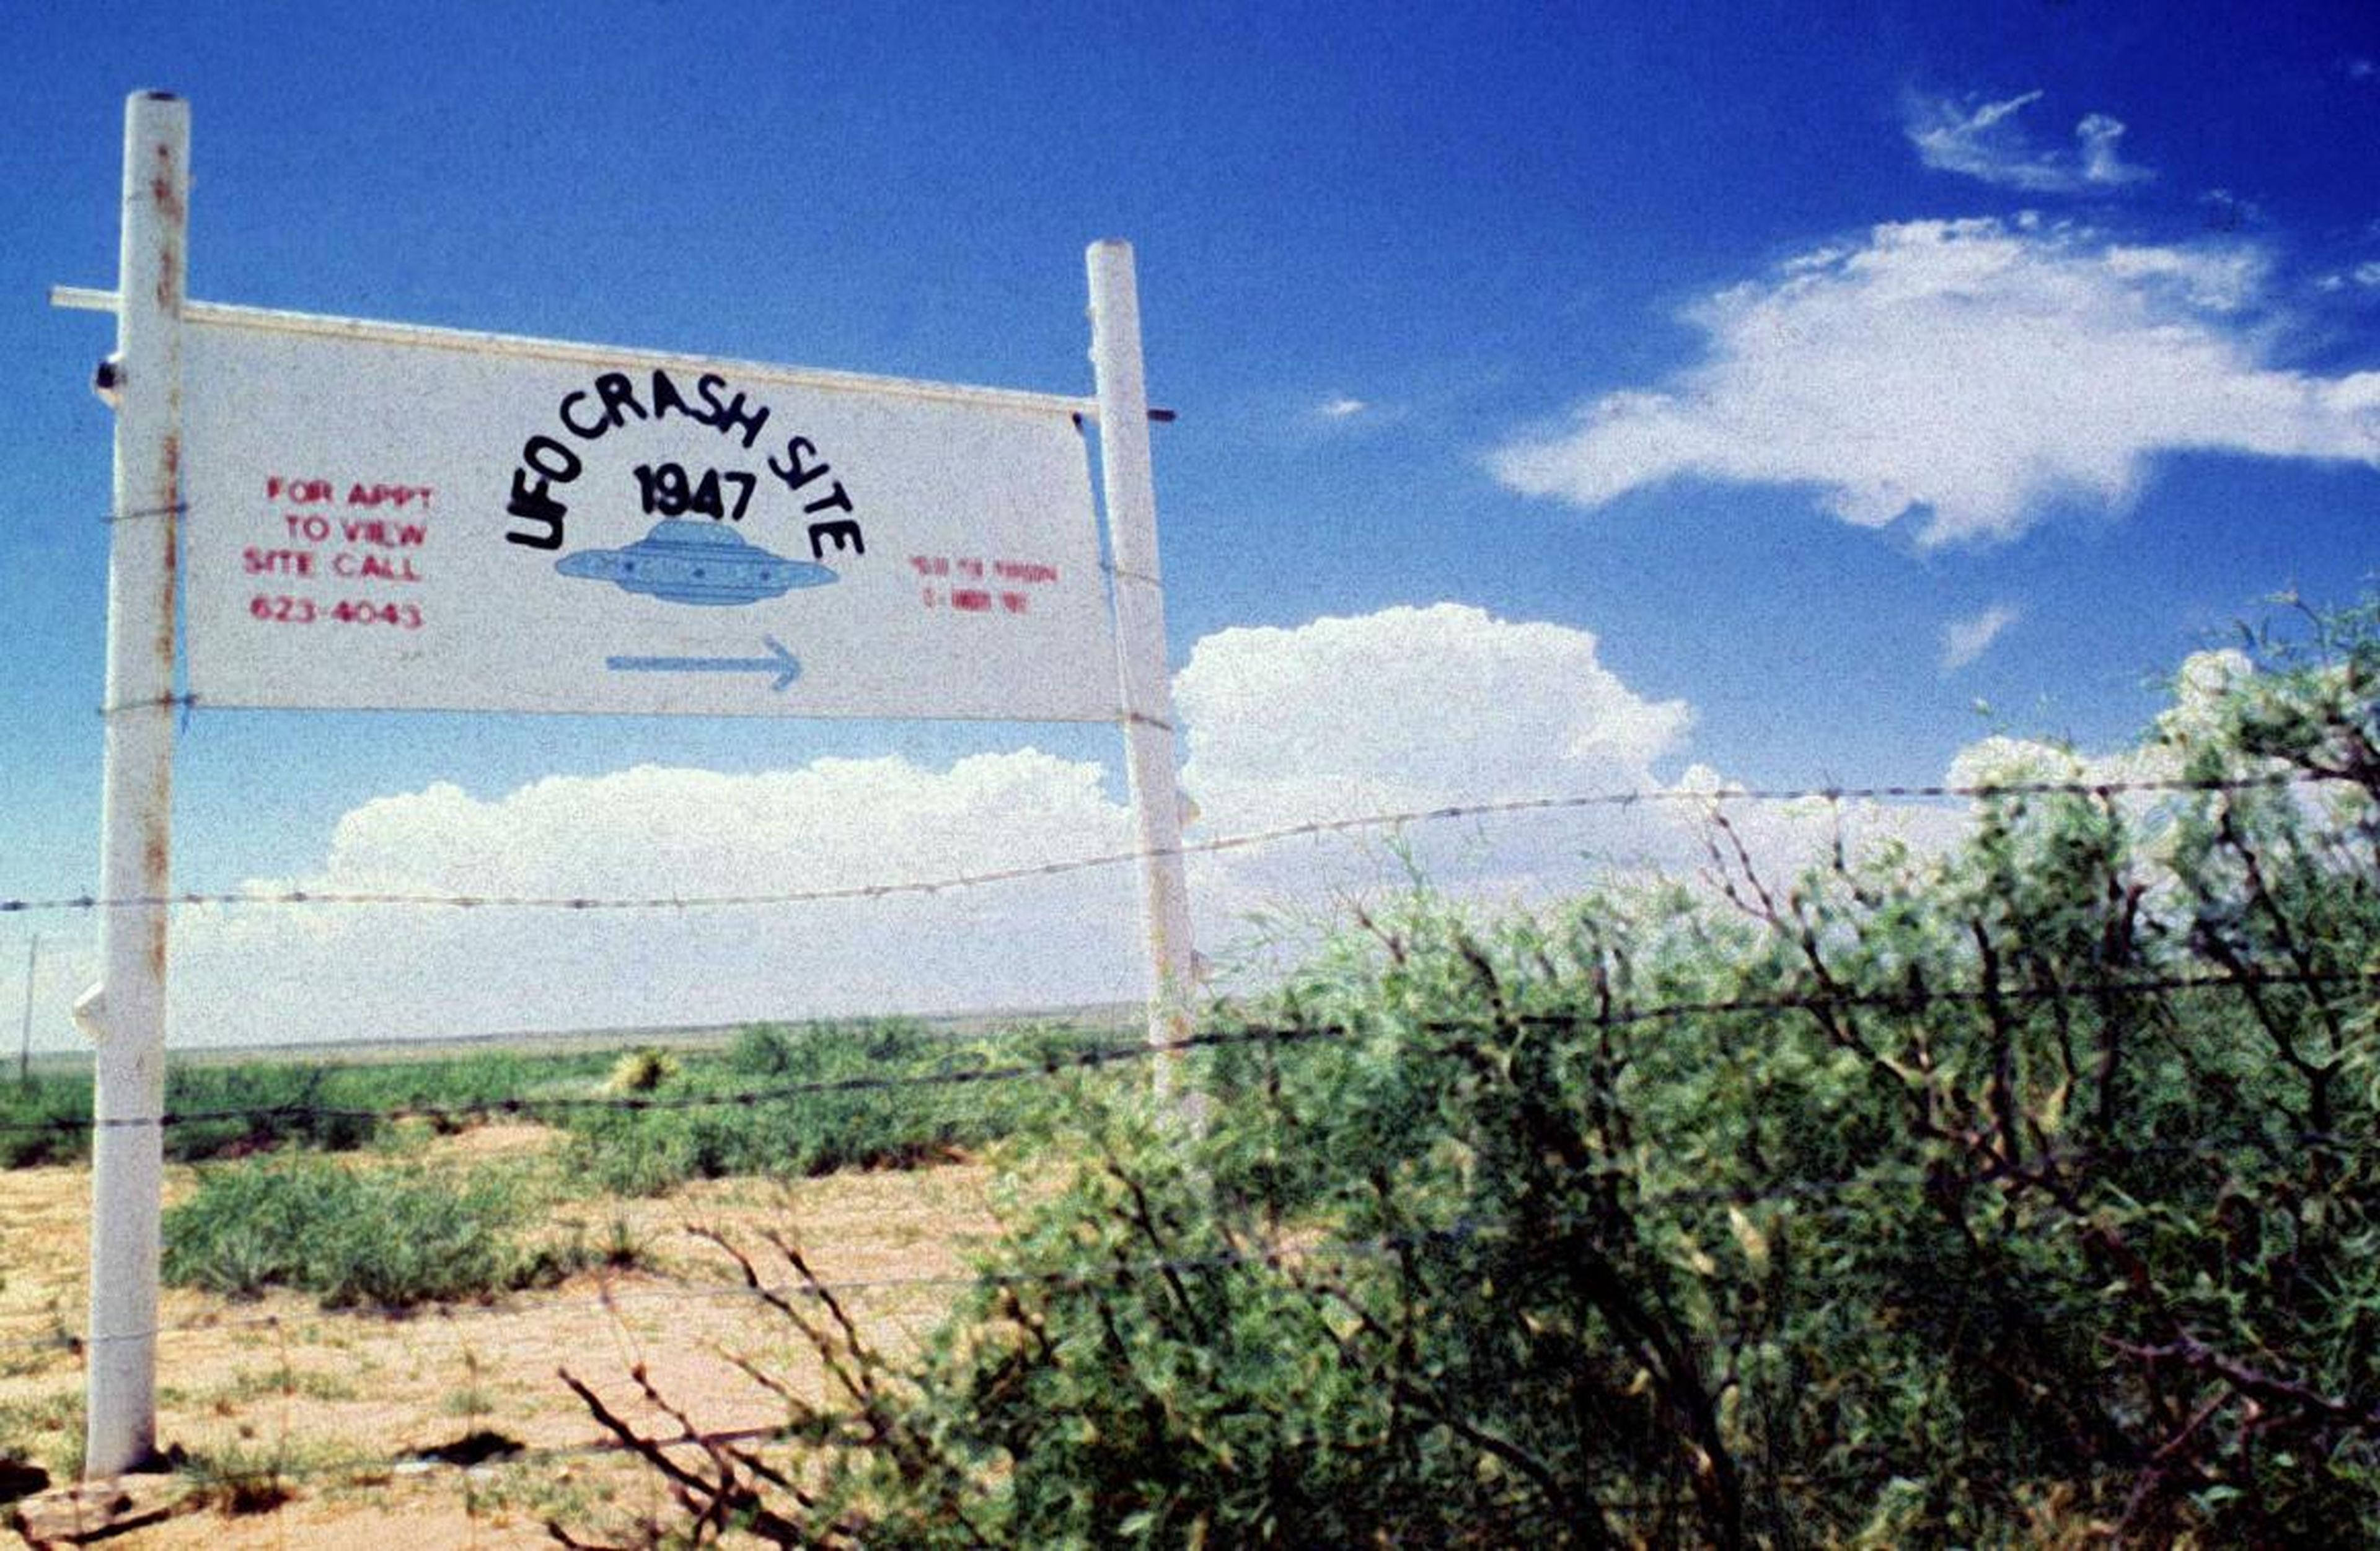 A sign north of Roswell, New Mexico, points west to the 1947 crash site.